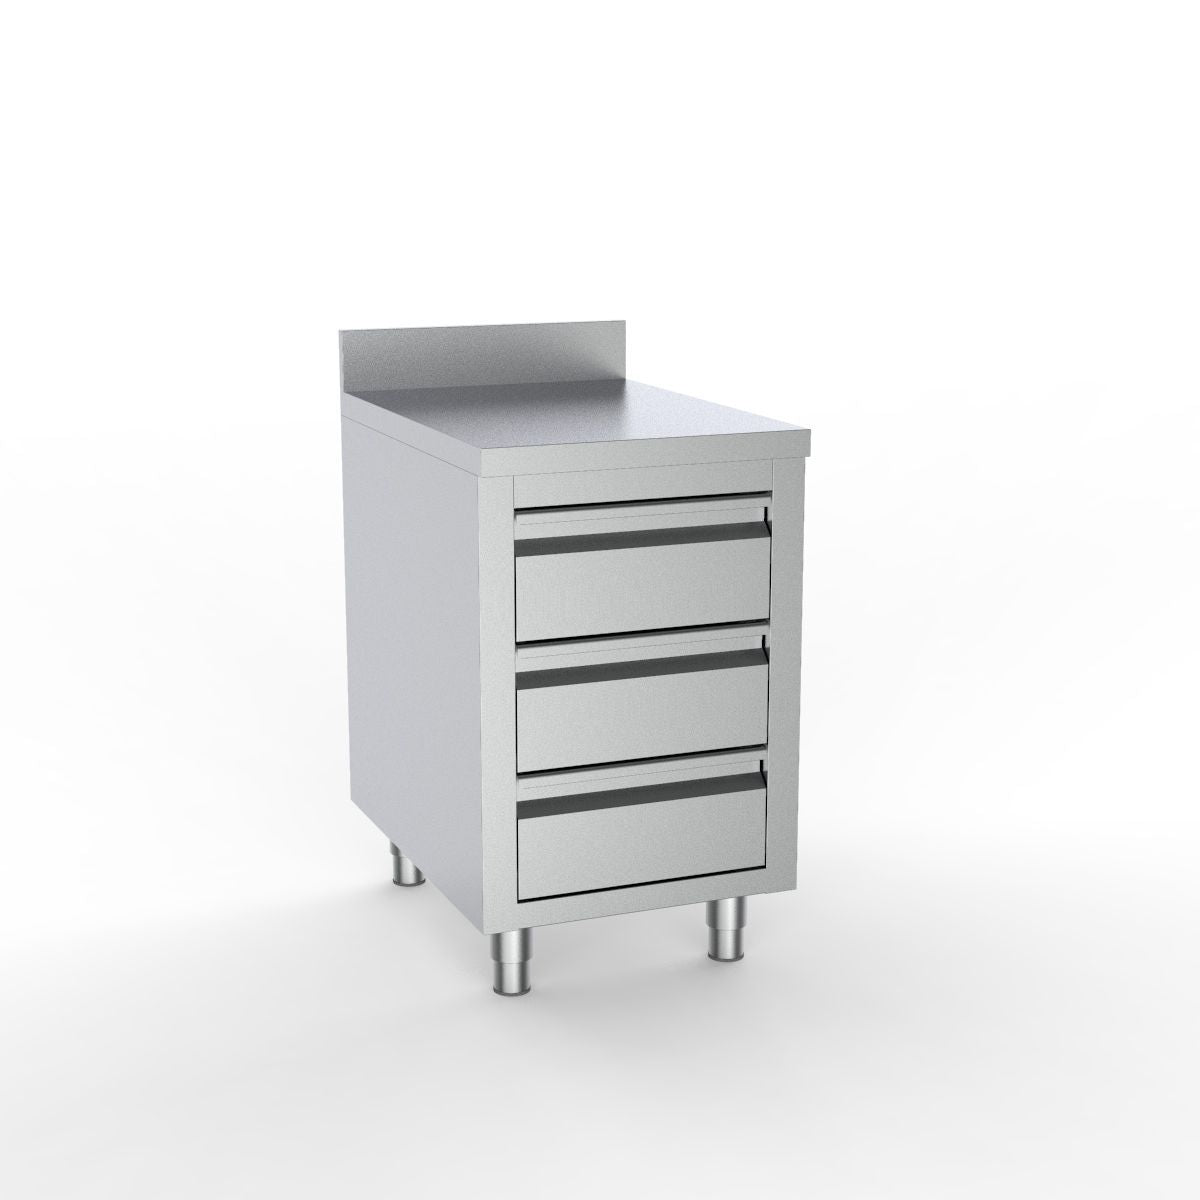 Combisteel Full 430 Stainless Steel Worktable Unit With 3 Drawers & Upstand 500mm Wide - 7333.0282